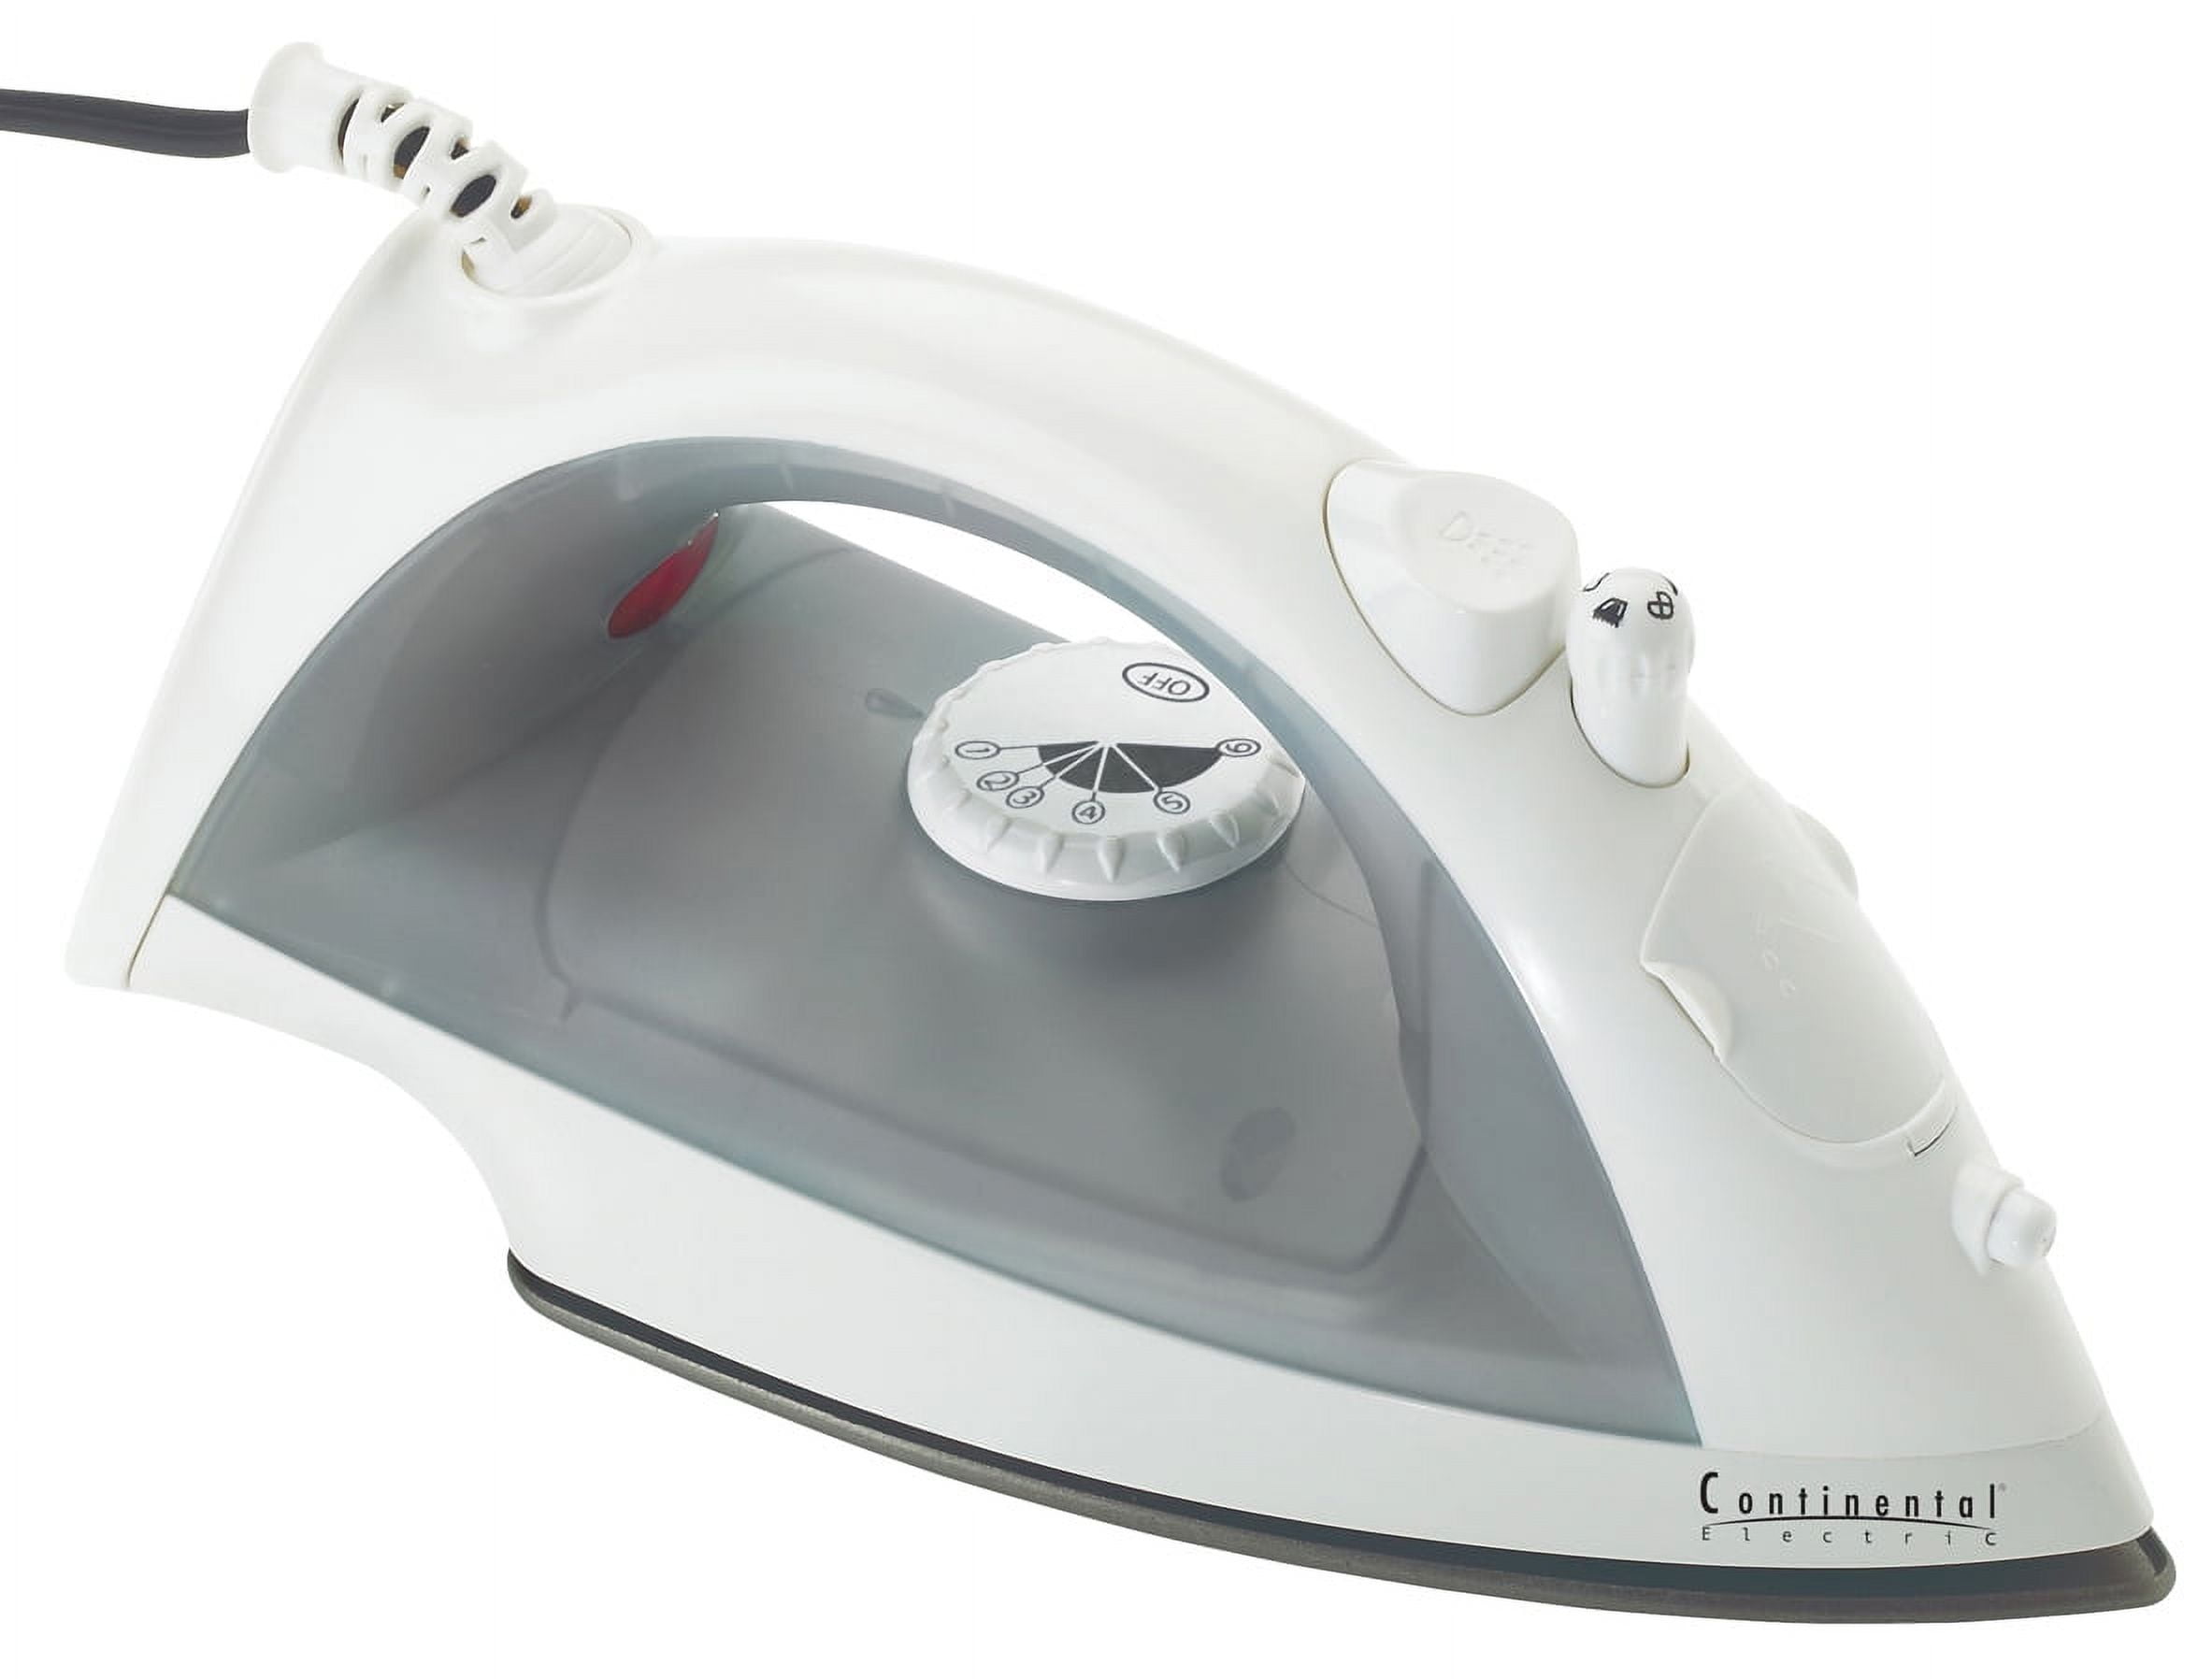  Continental Electric CP43021 Classic Iron, Medium, Silver :  Home & Kitchen